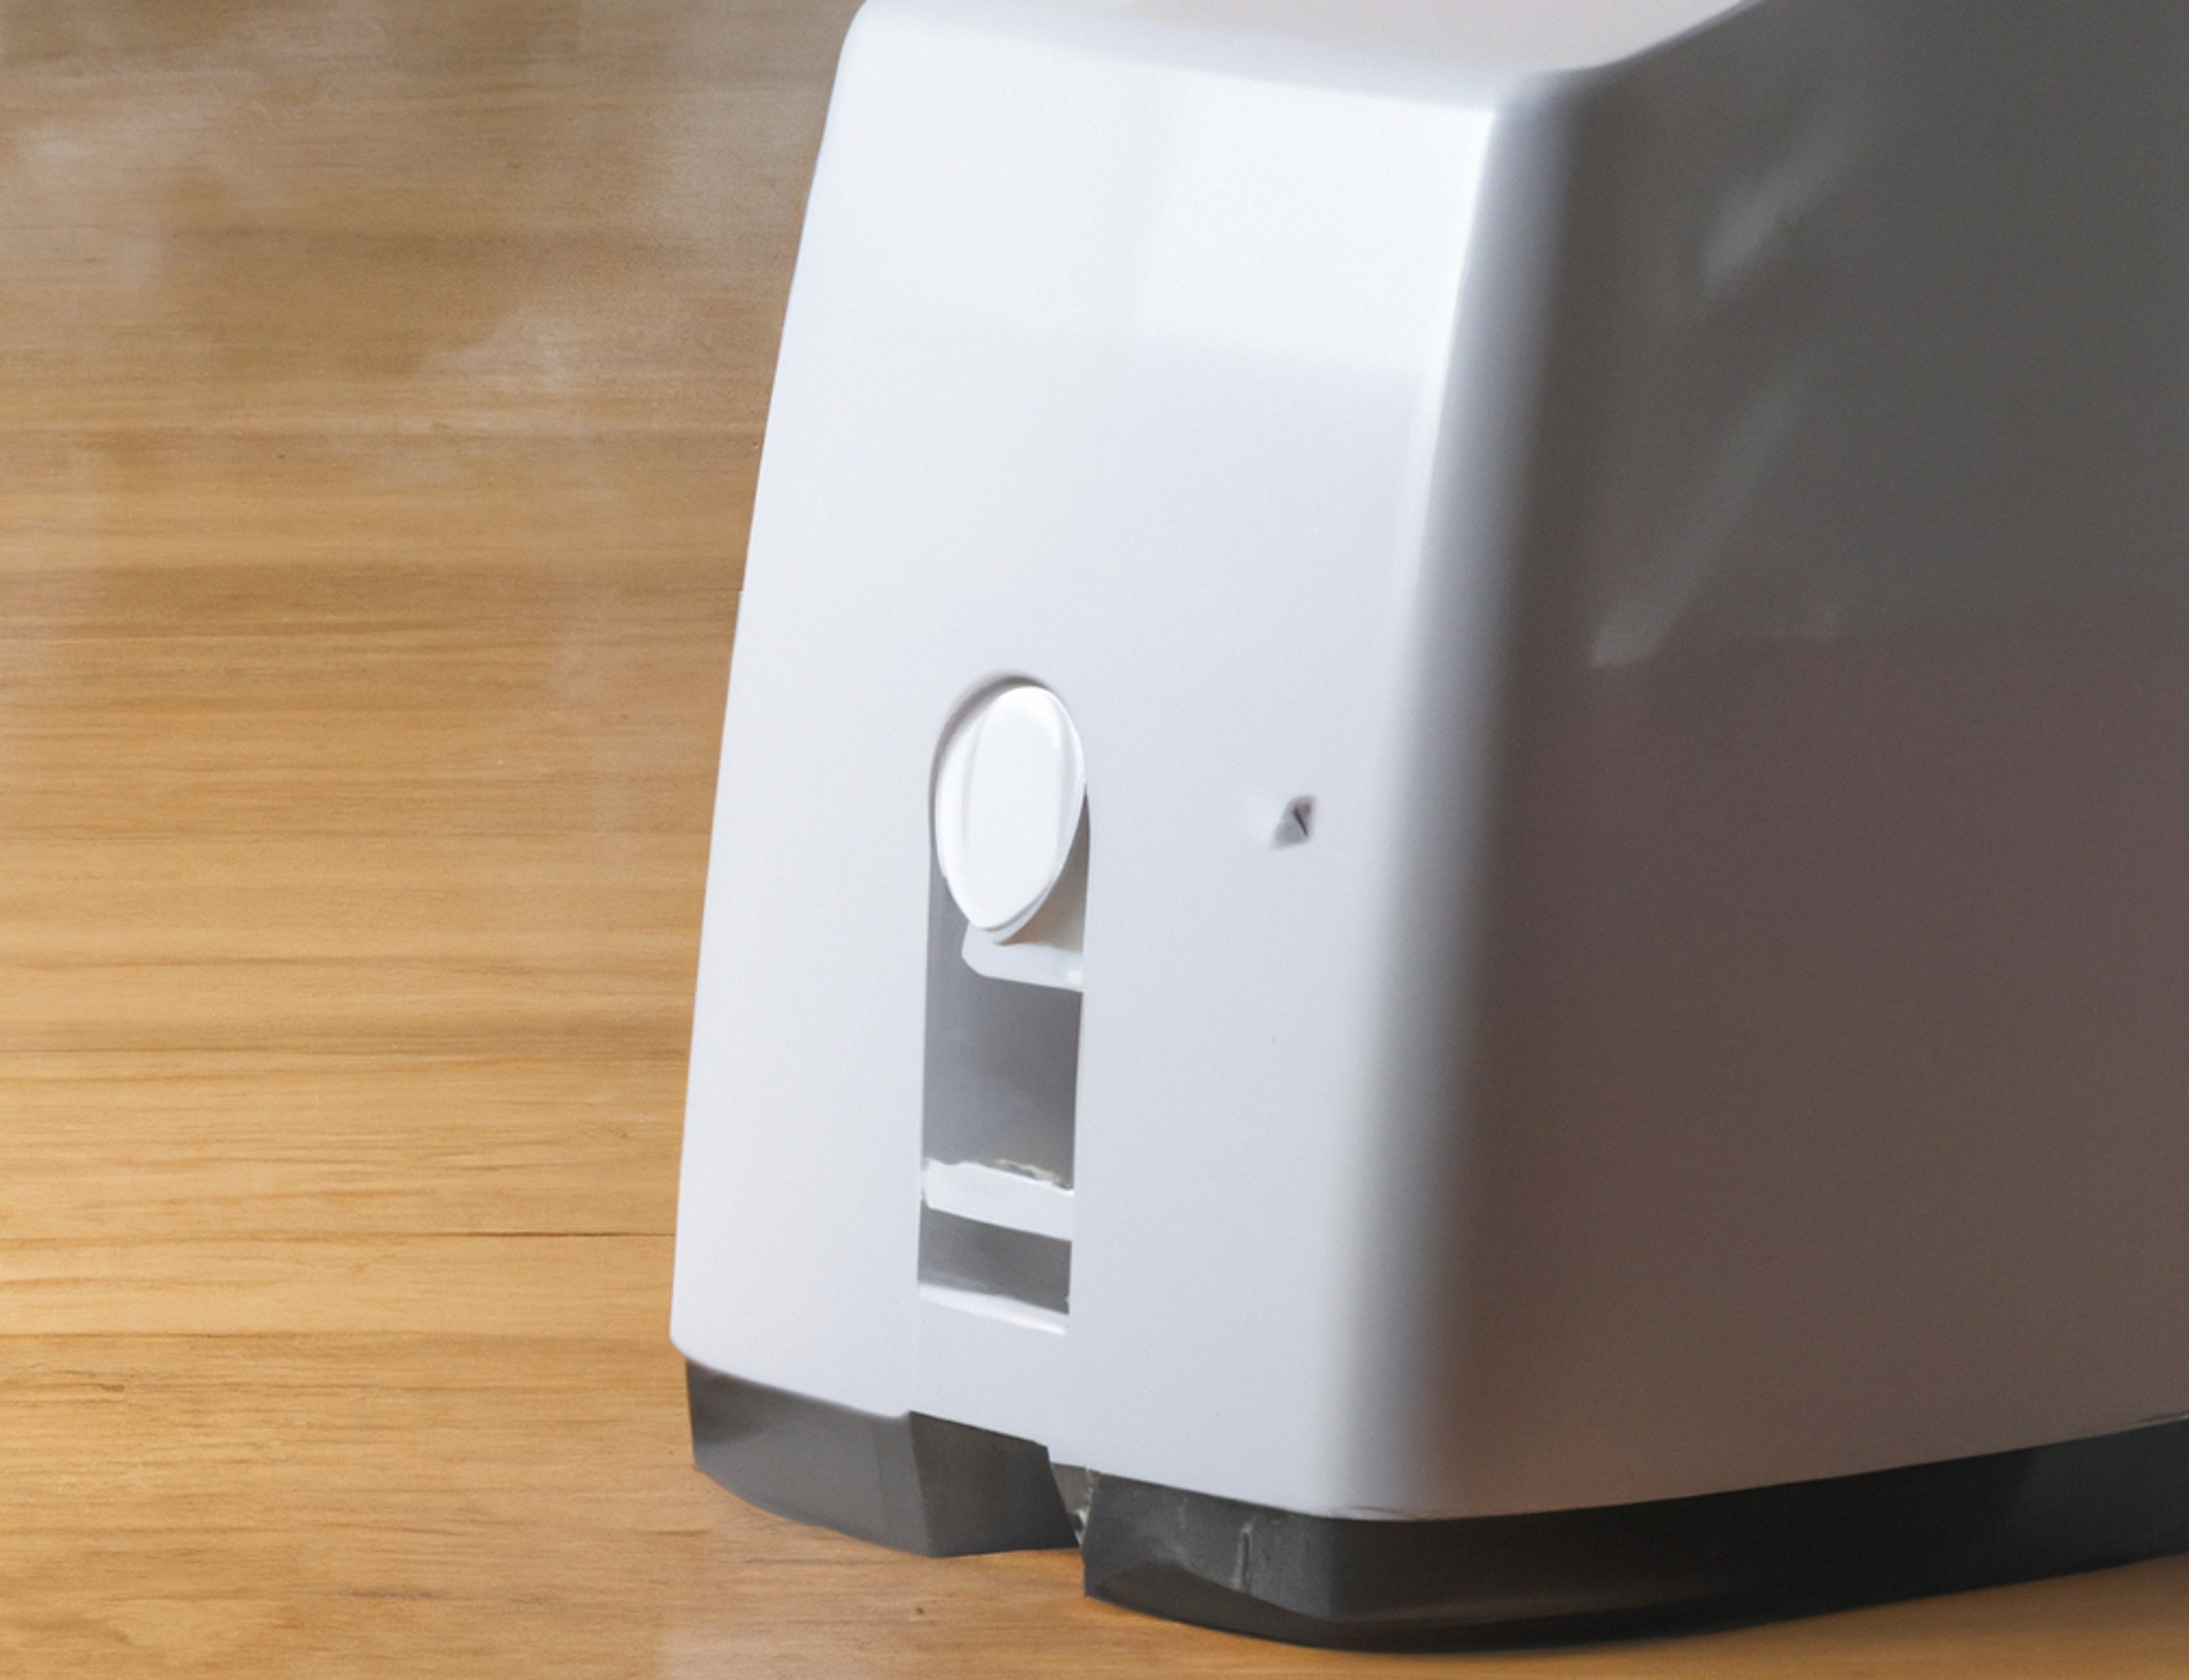 How Much Does It Cost to Run a Dehumidifier?